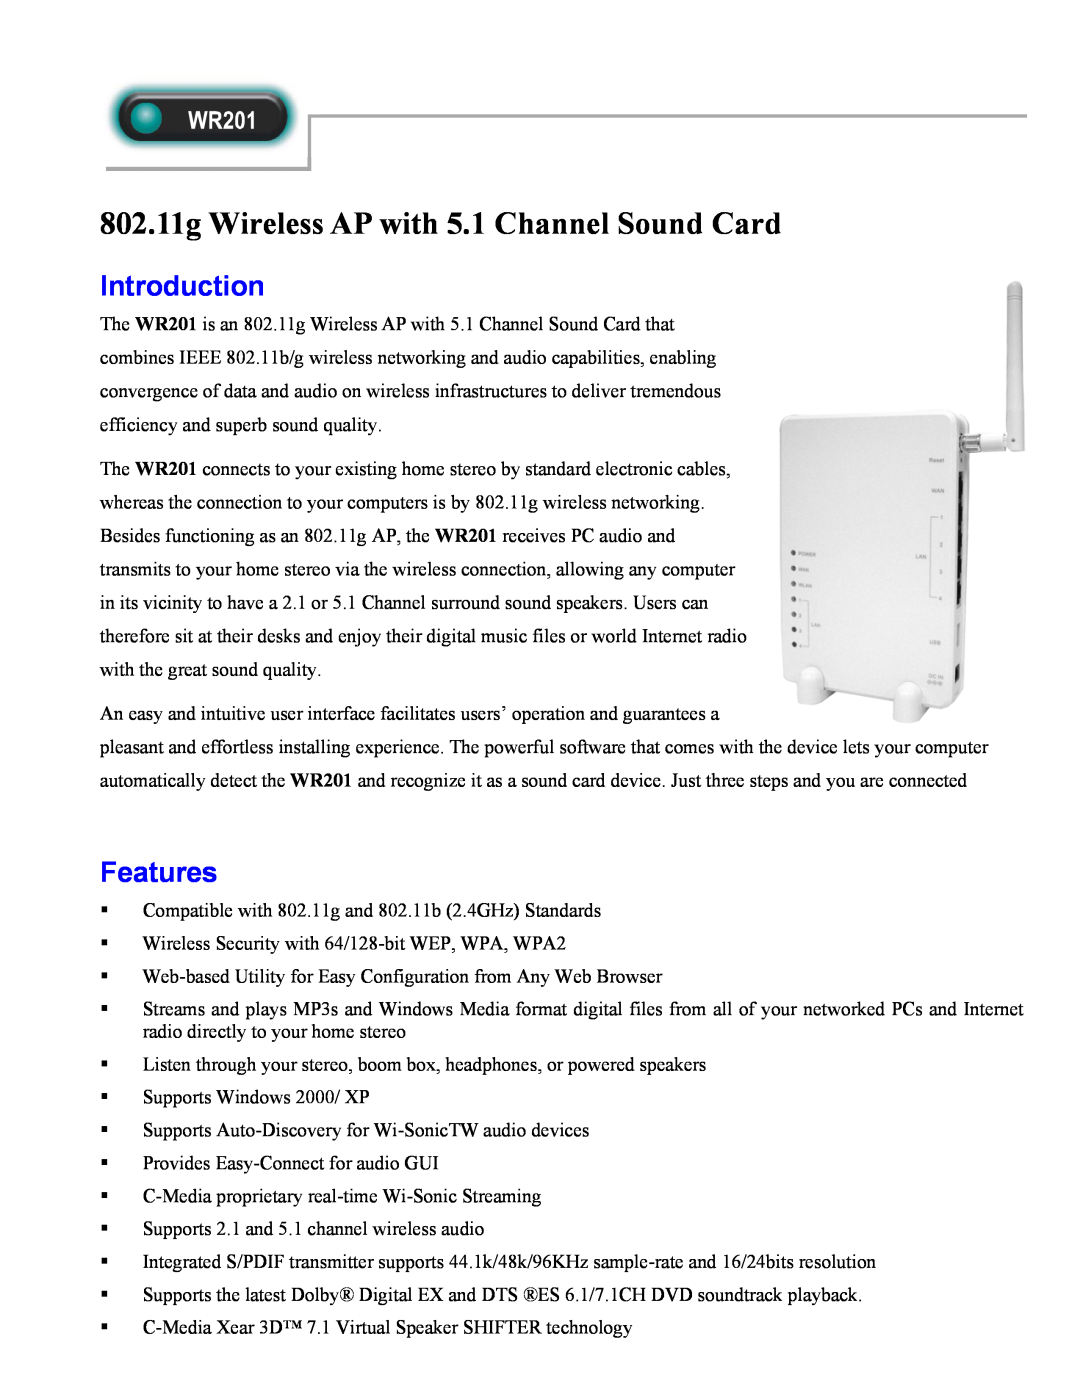 Abocom WR201 manual Introduction, Features, 802.11g Wireless AP with 5.1 Channel Sound Card 